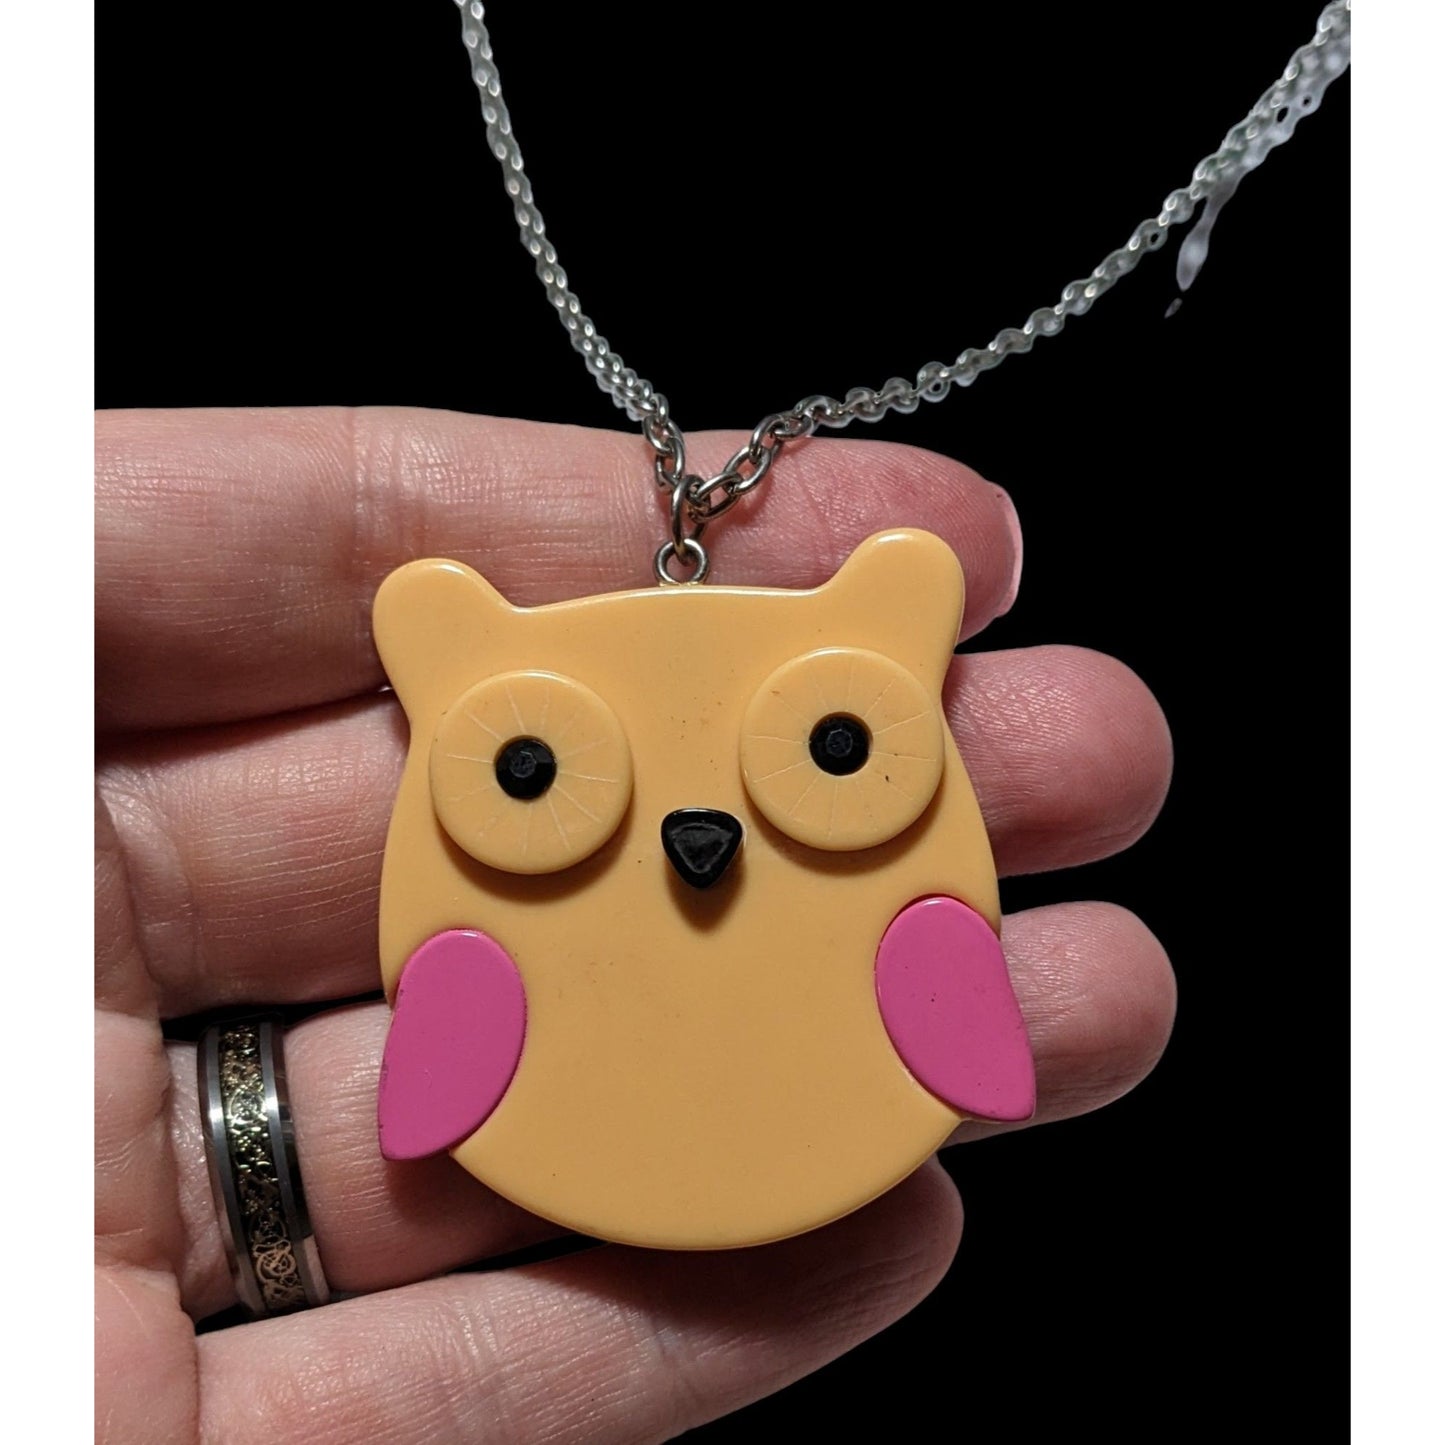 Owl Cookie Necklace